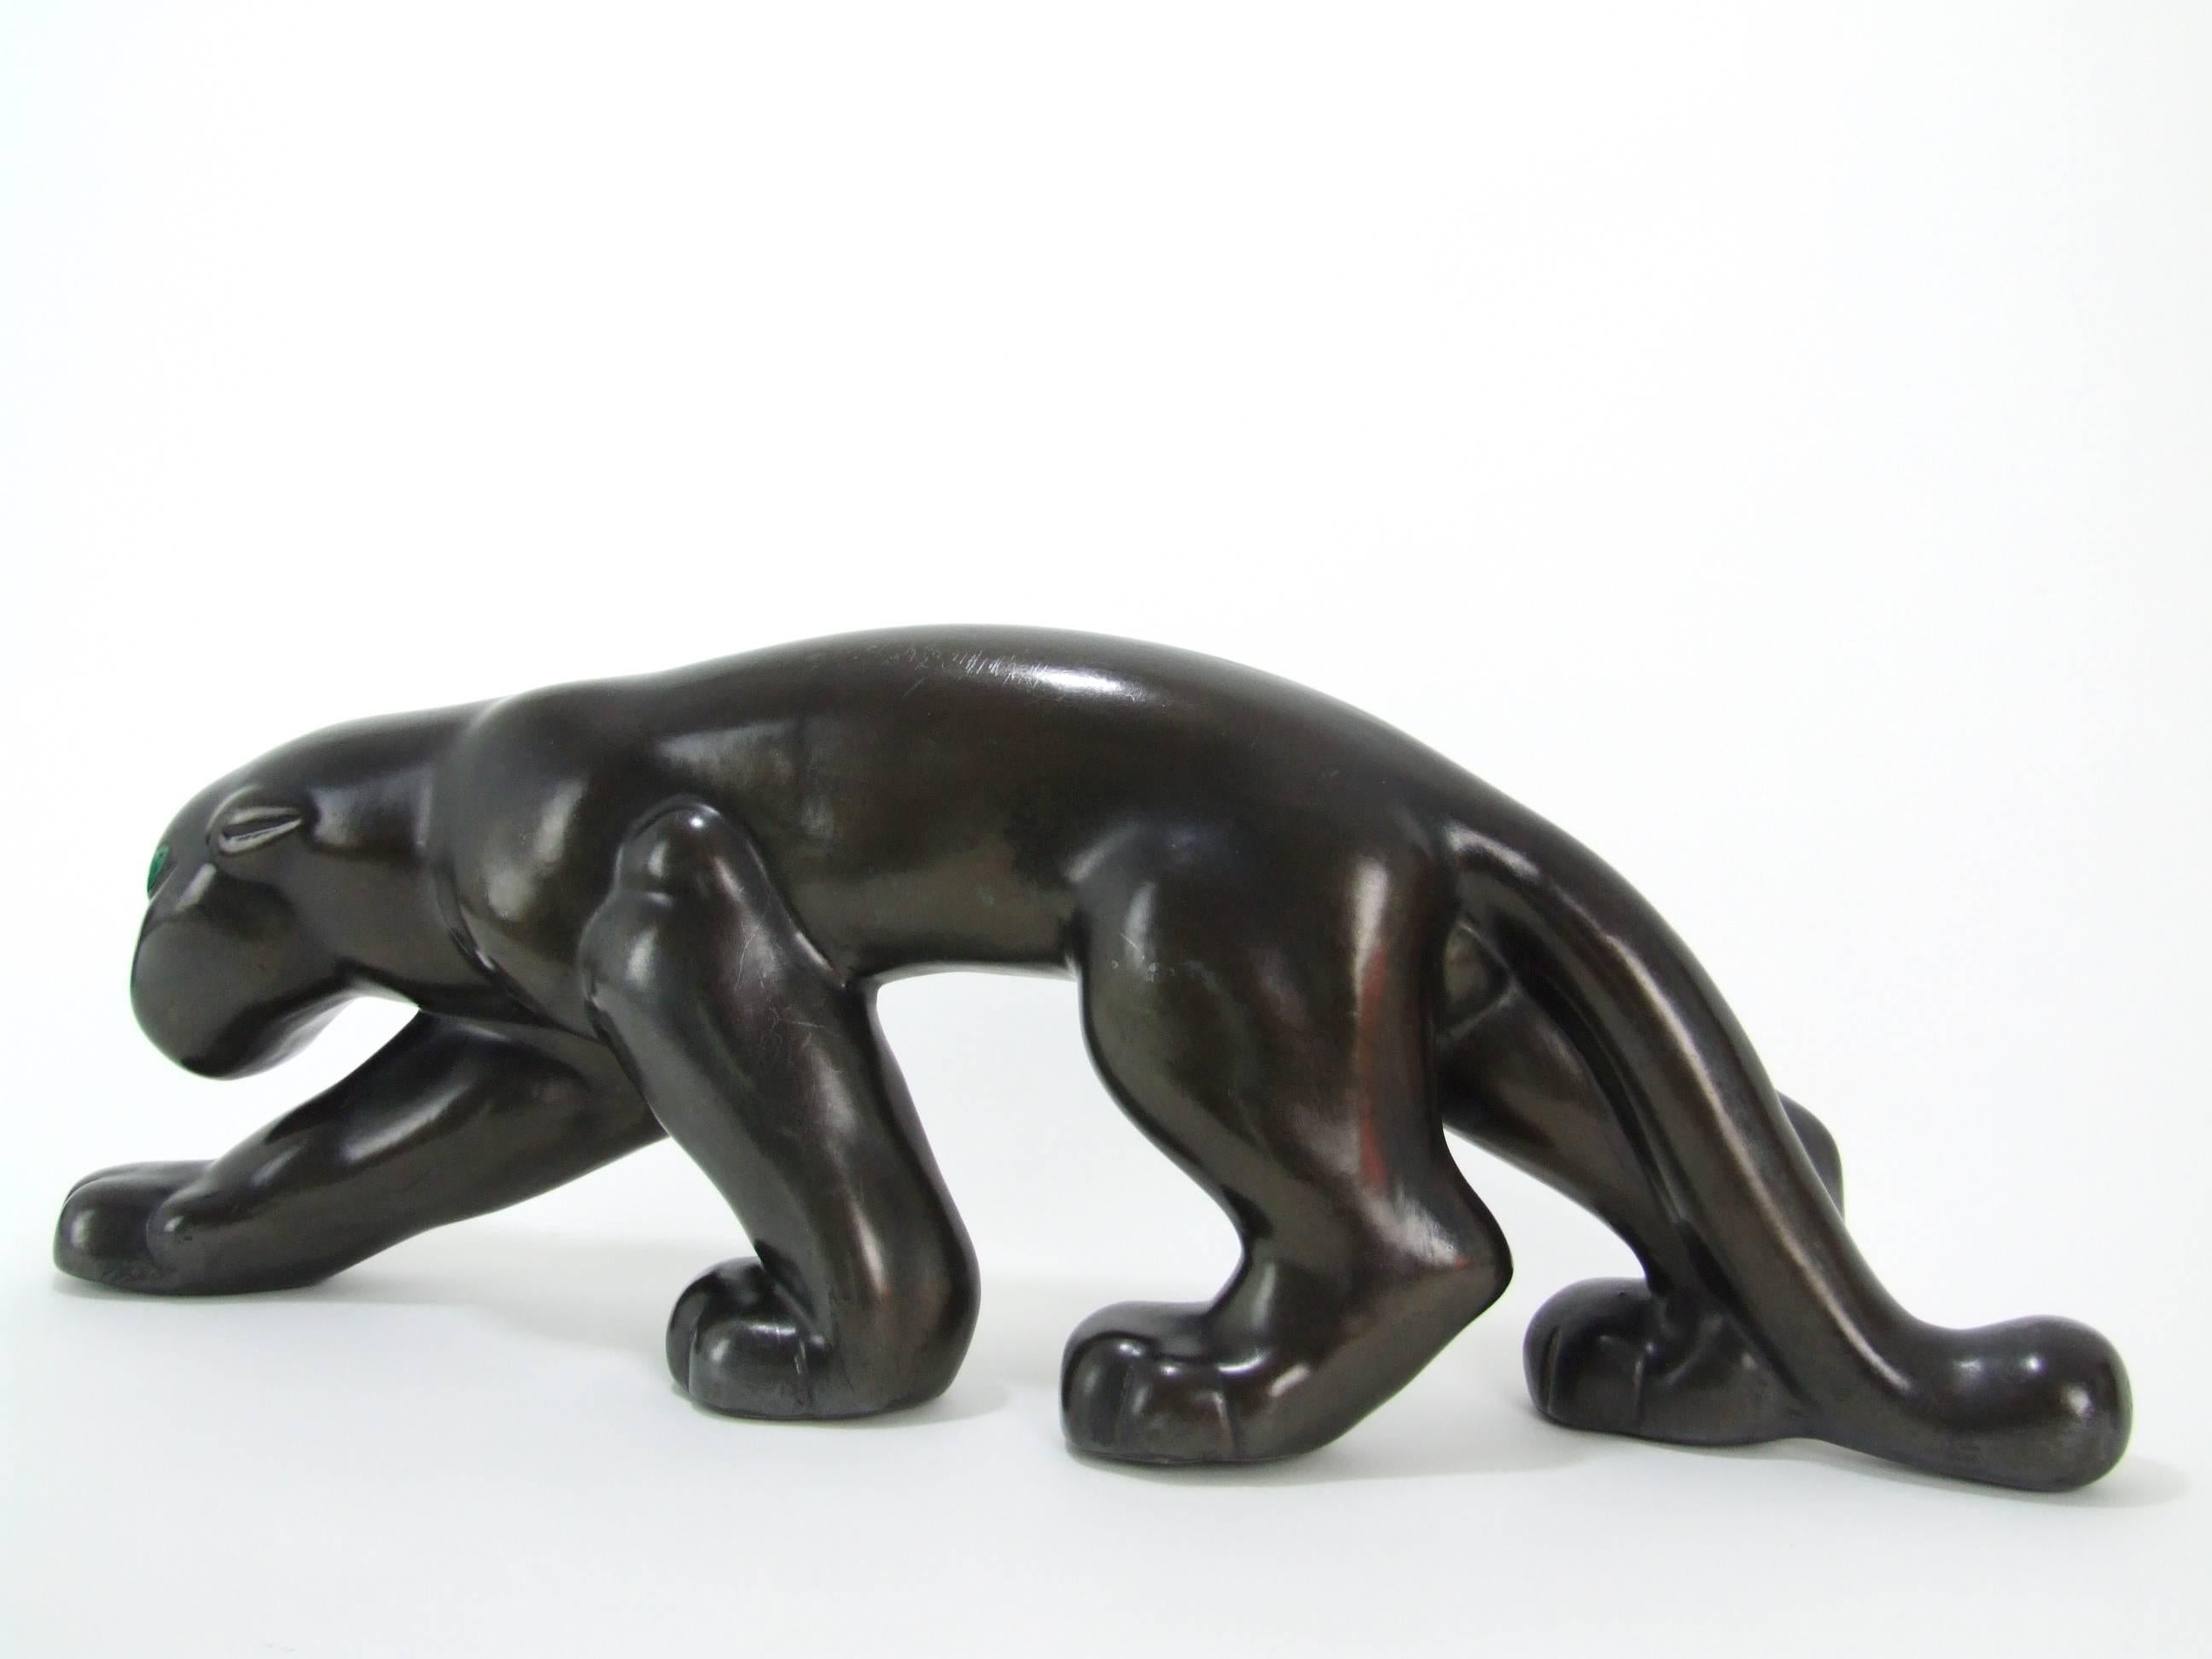 A large and original ceramic panther made by the Primavera Atelier and featured in the Les Craqueles Art Deco book. He measures 59cm (23.25 inches) long and is in very good vintage condition. He has a very dark, but not black finish with tones of